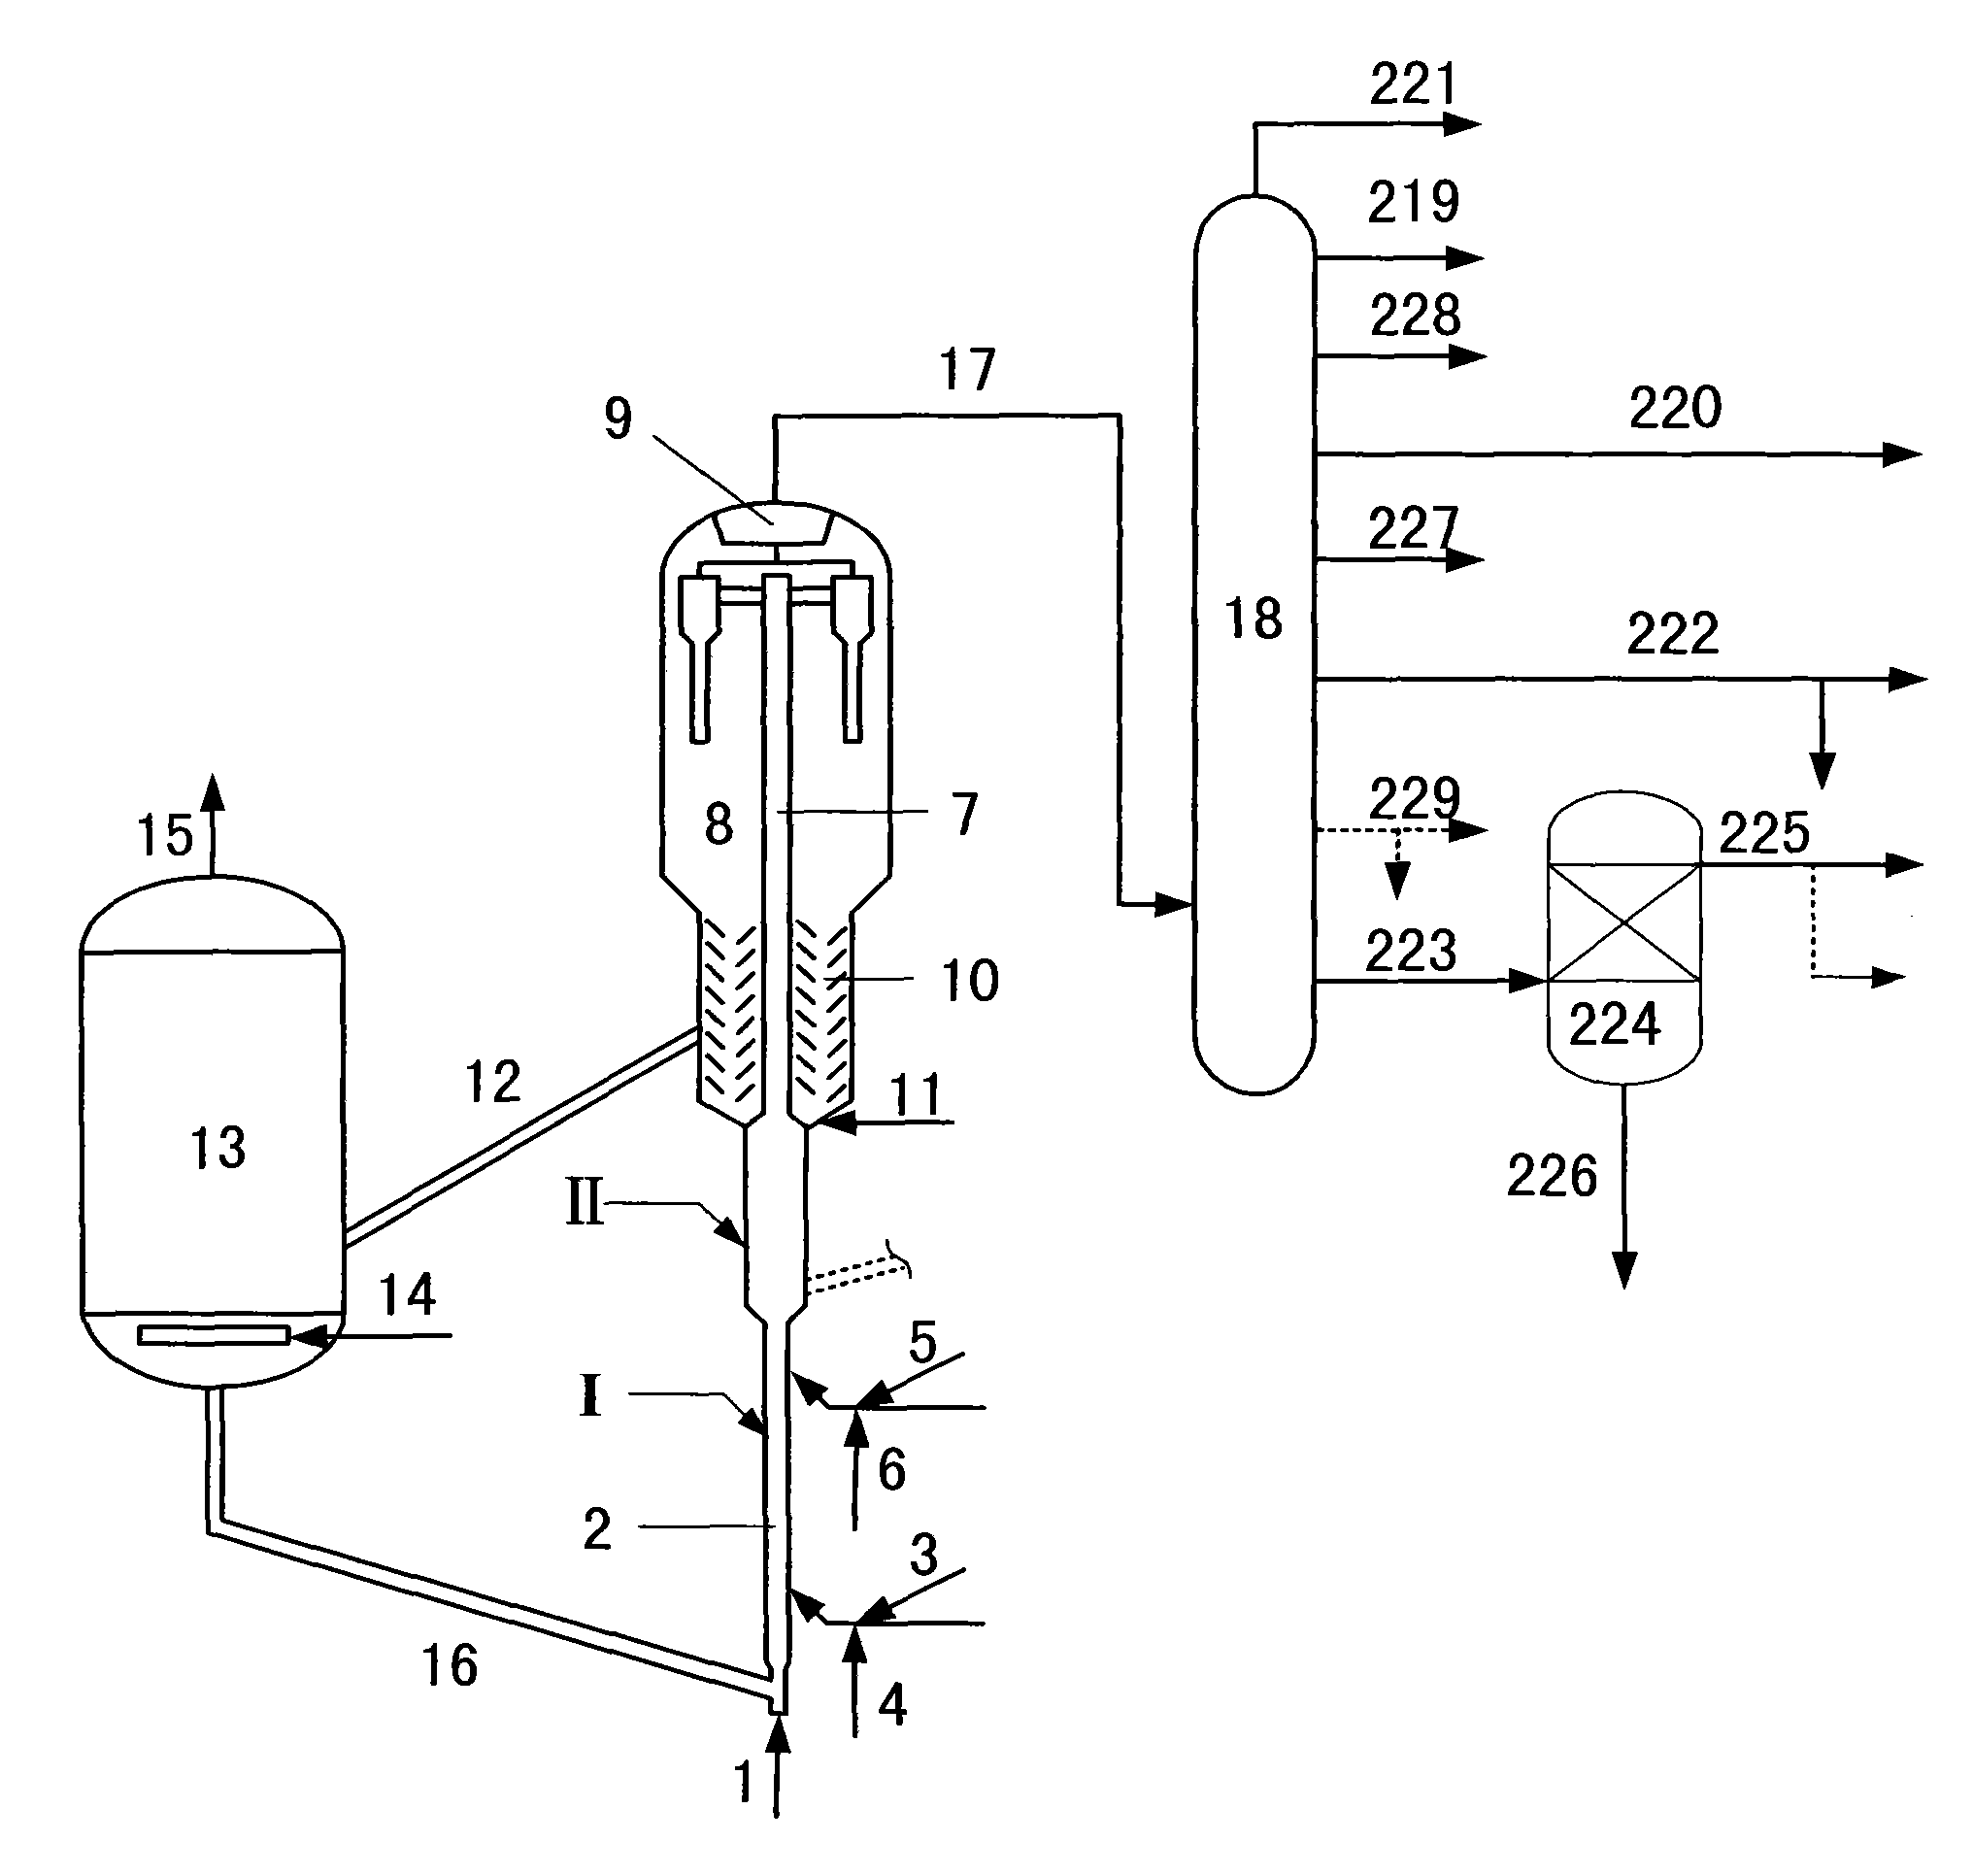 Catalytic conversion method for preparing propylene and high-octane gasoline with crude oil